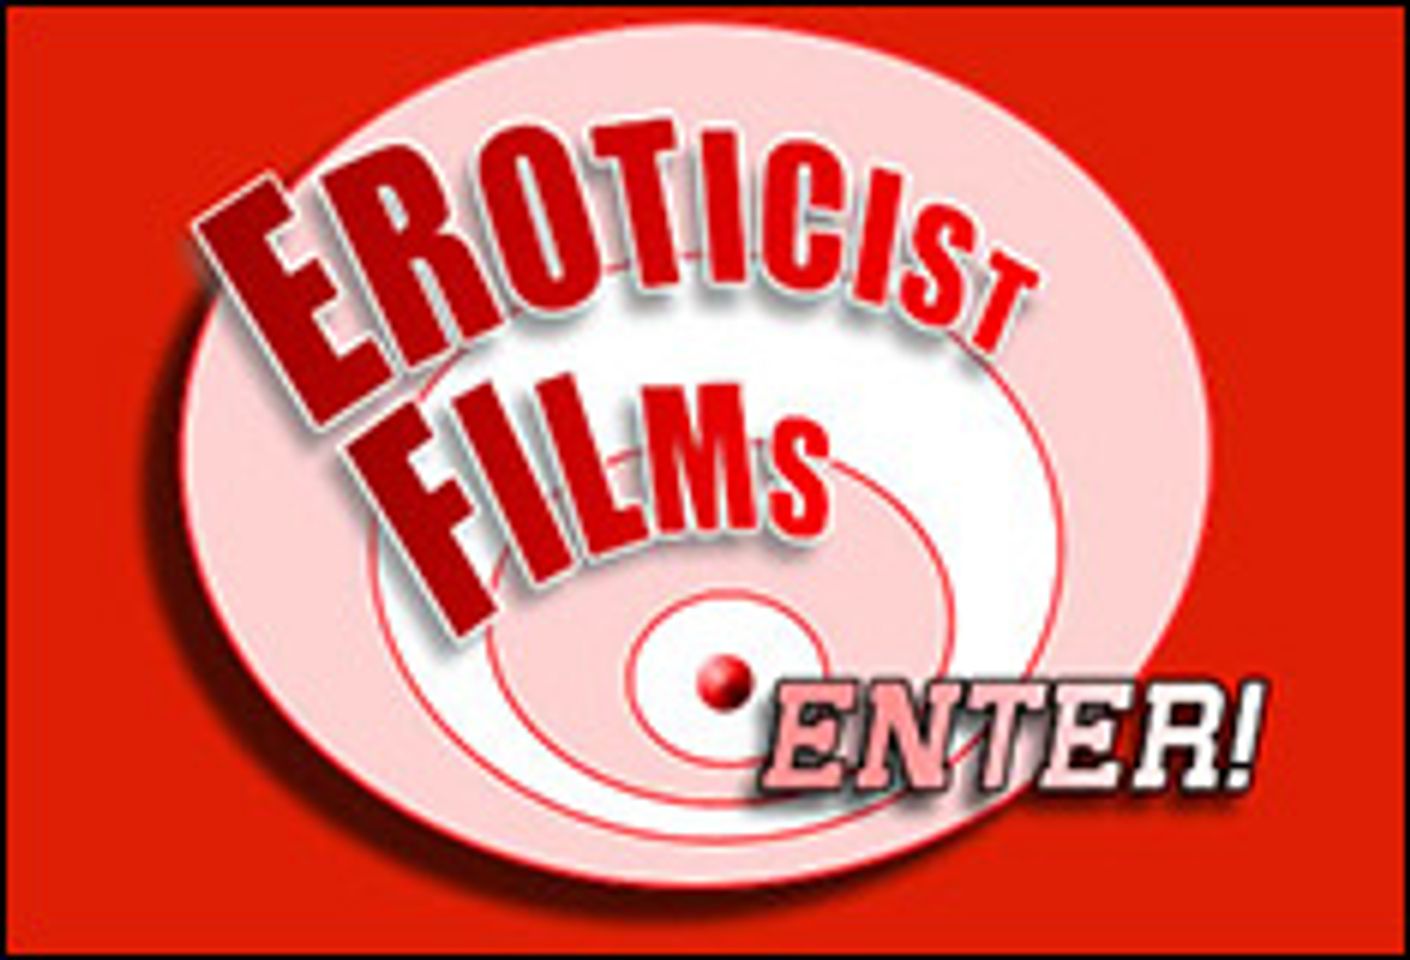 Eroticist Films Announces Porn Karaoke Competition at AEE